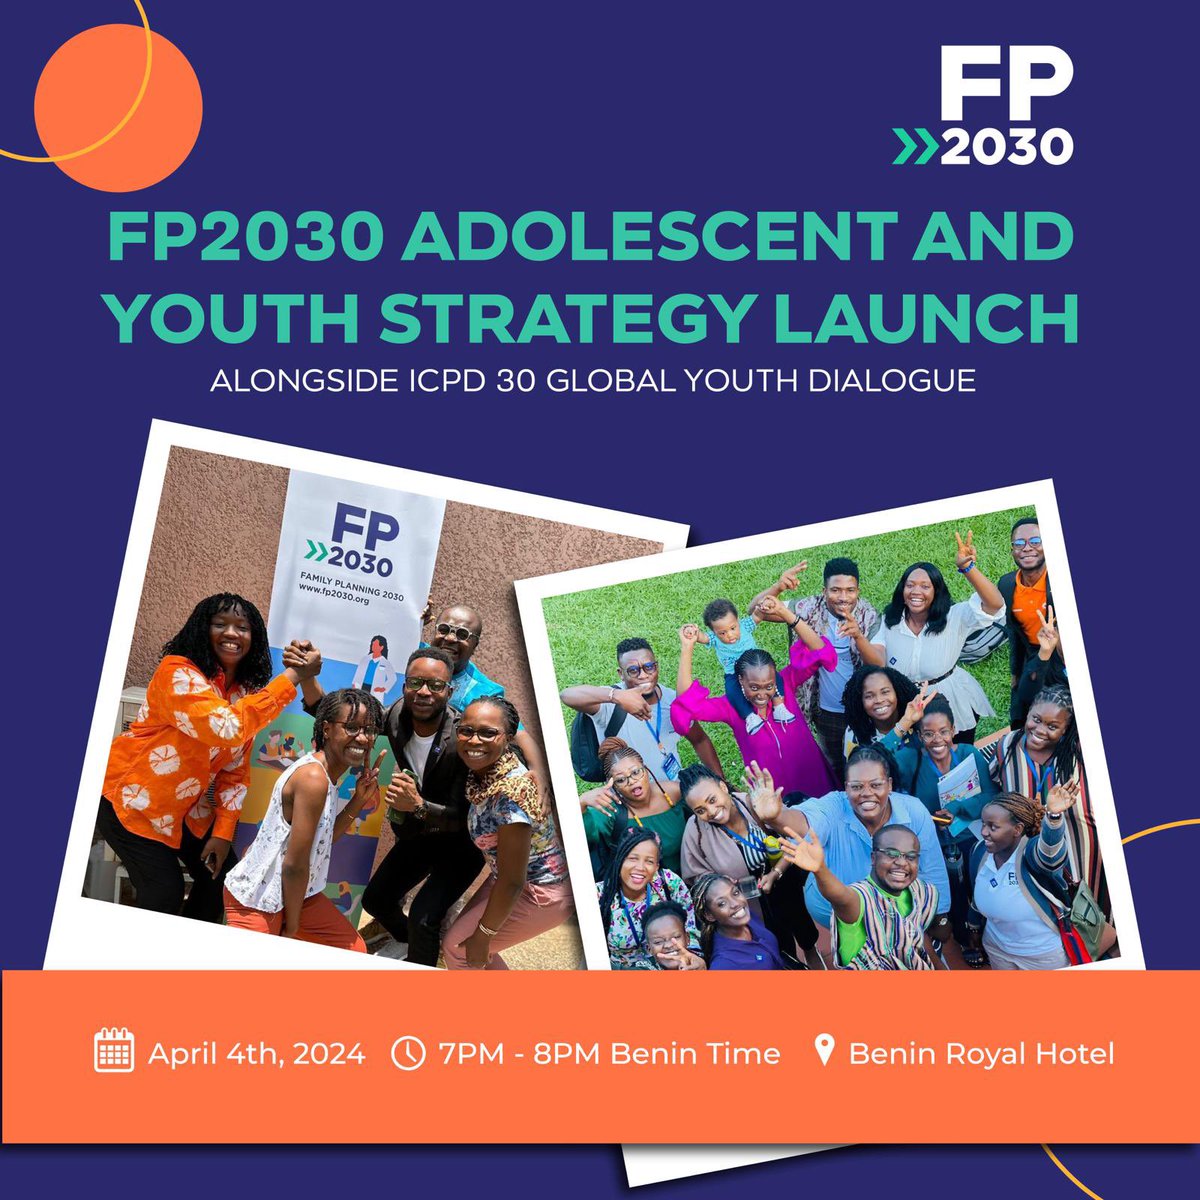 Are you attending ICPD30 Global Youth Dialogue in Cotonou, Benin? Excited to welcome you to @FP2030Global Adolescent and Youth Strategy Launch on 4th April, 2024 at 7pm, happening live at Benin Royal Hotel. Elated to welcome you personally 💃🏿💃🏿💃🏿💃🏿💃🏿💃🏿